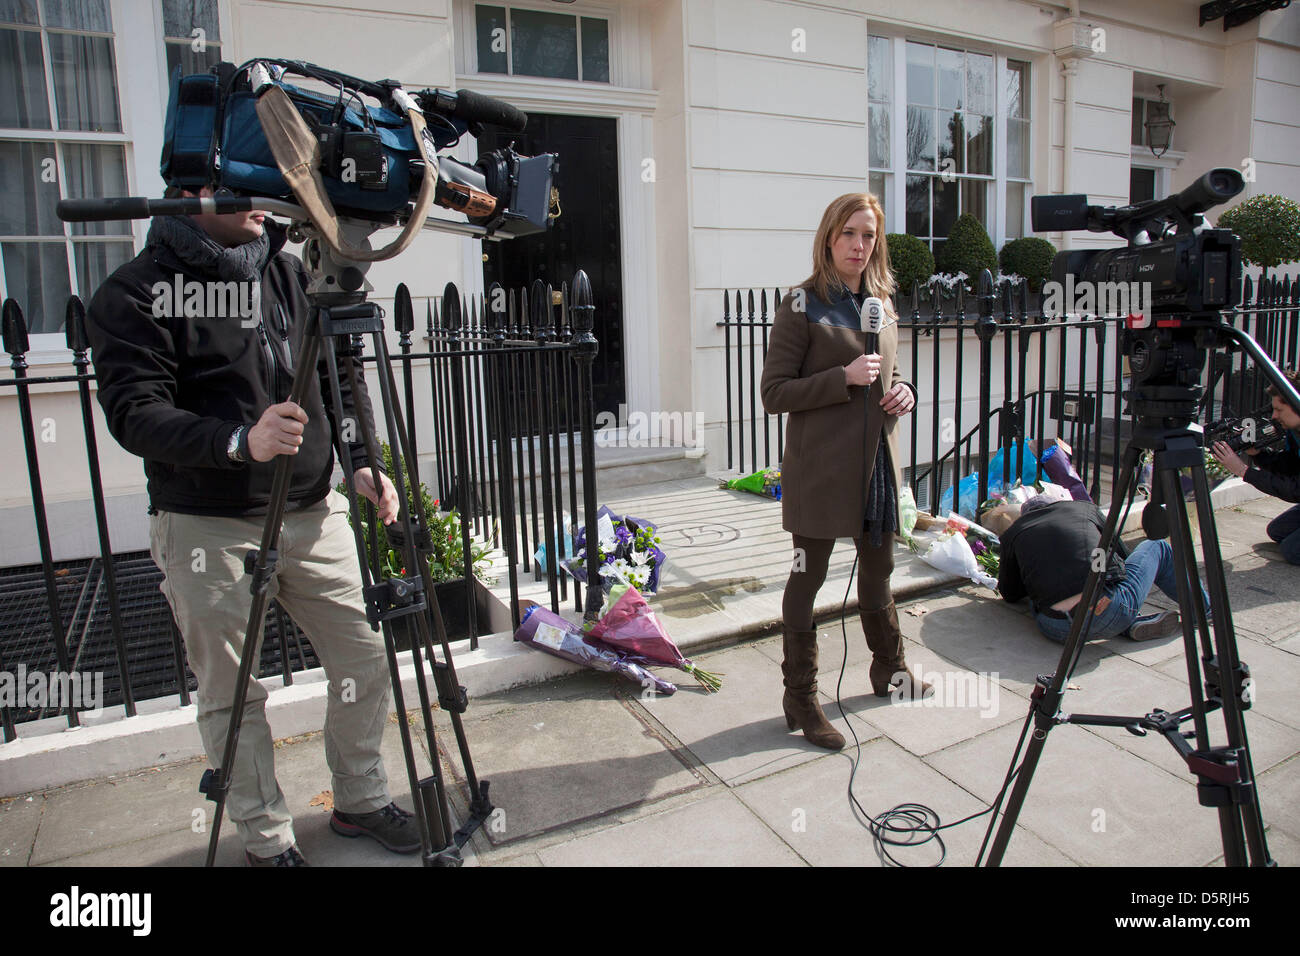 Media gather at the London residence on Chester Square of Baroness Margaret Thatcher following the announcement of her death. Maggie Thatcher (87), aka the 'Iron Lady' dominated British politics for 20 years. Stock Photo